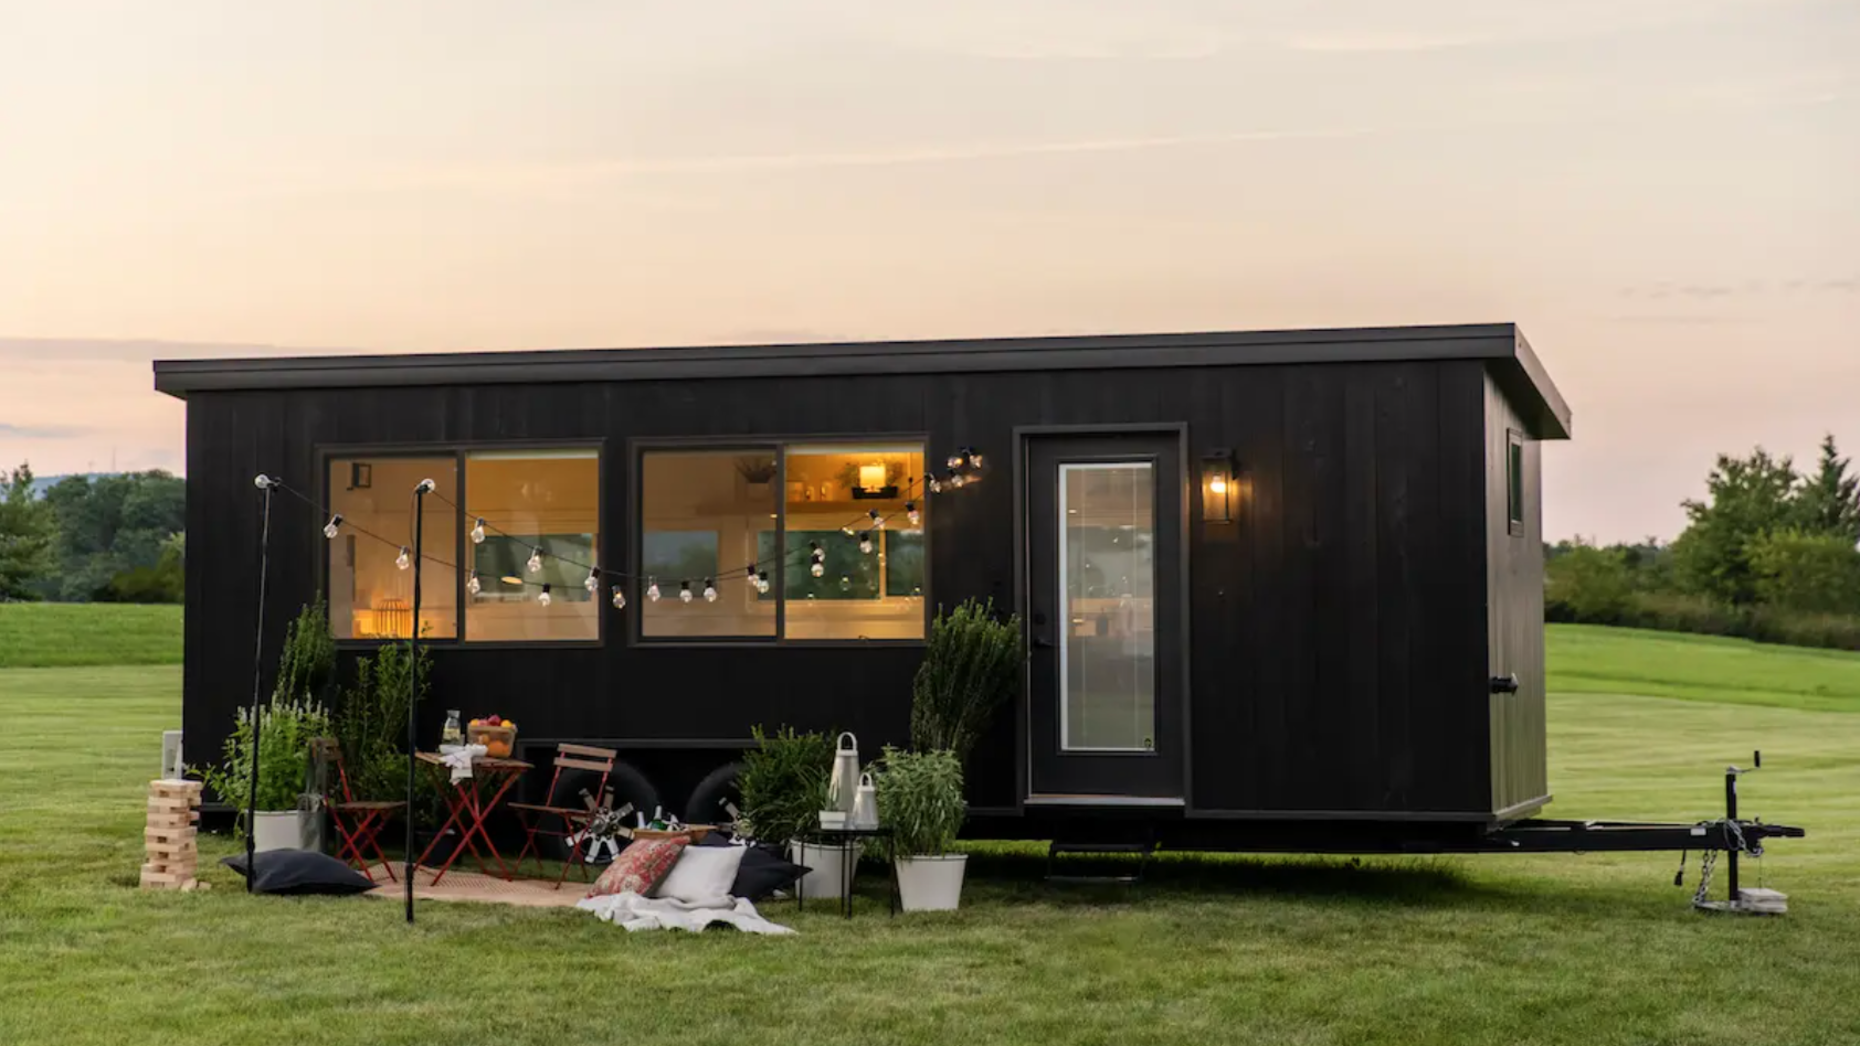 6 Big Reasons the Tiny House Movement is on the Rise